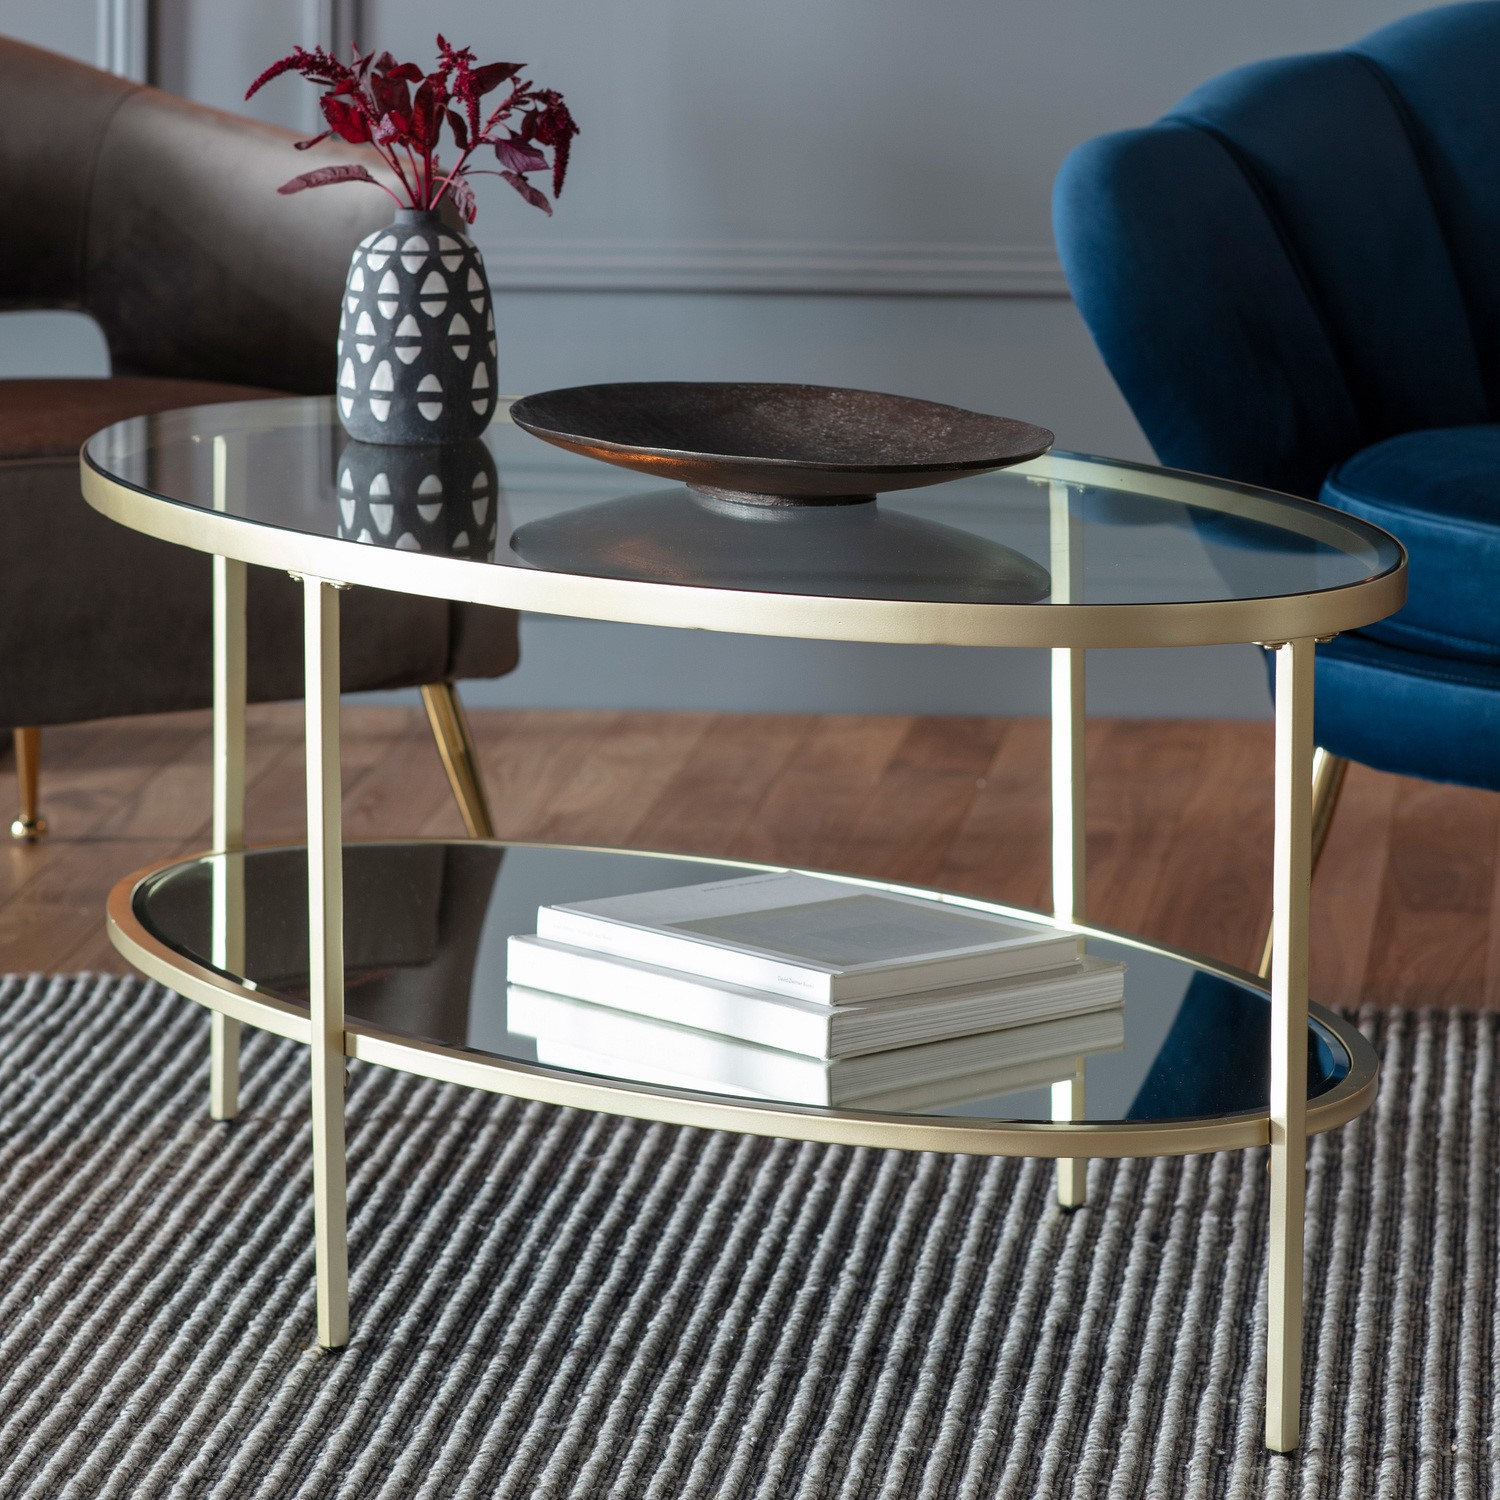 Read more about Hudson glass coffee table in champagne caspian house